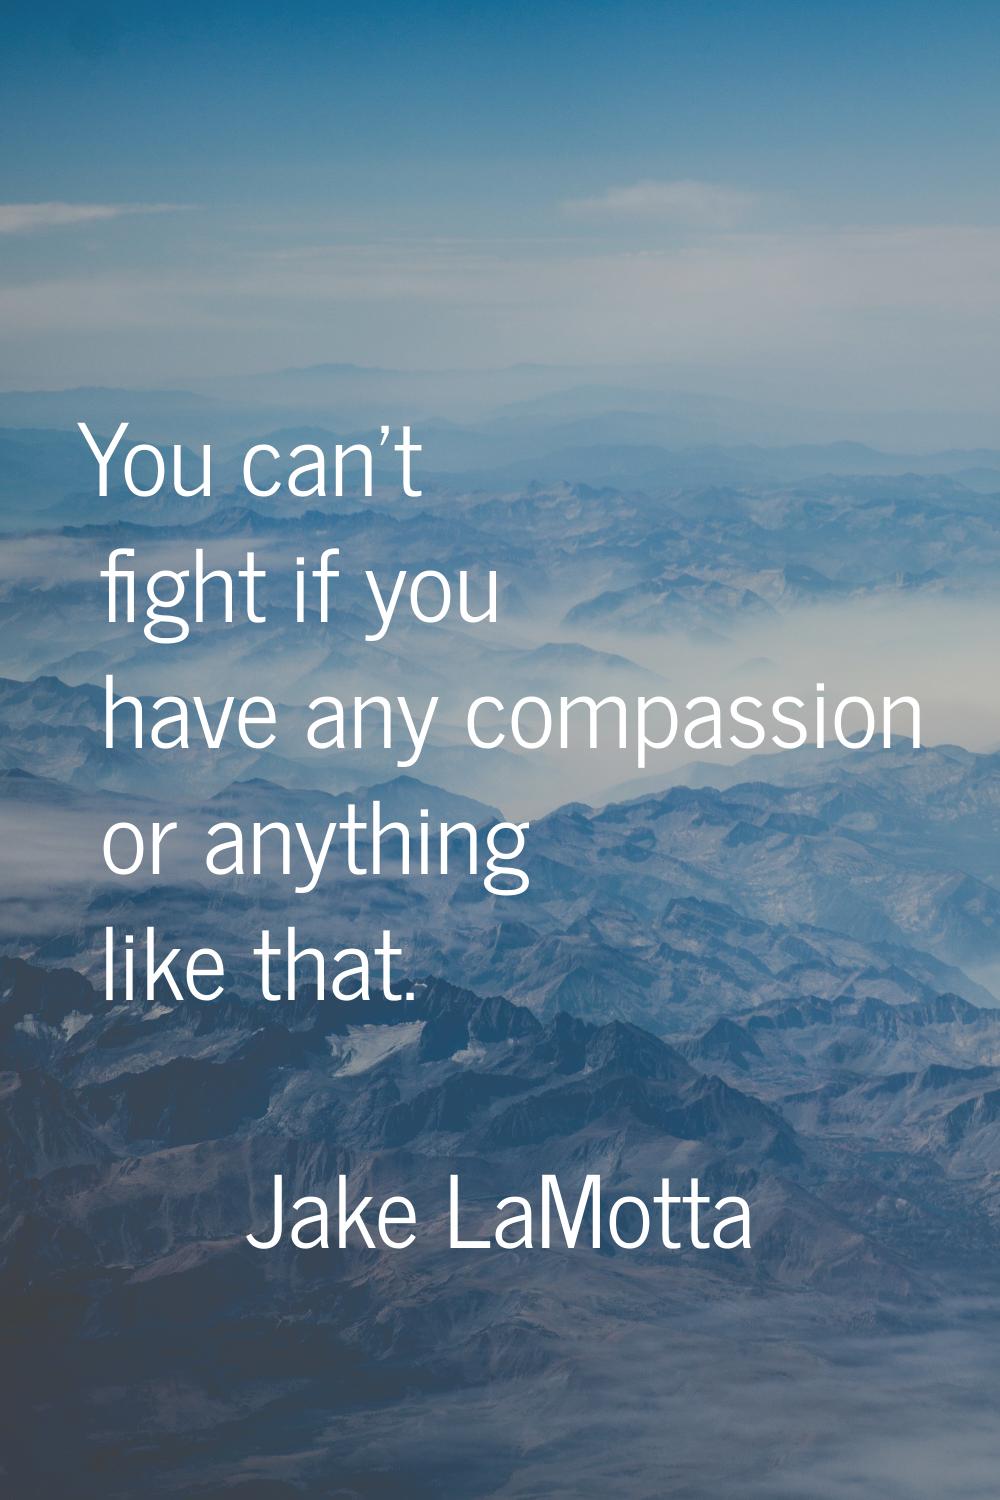 You can't fight if you have any compassion or anything like that.